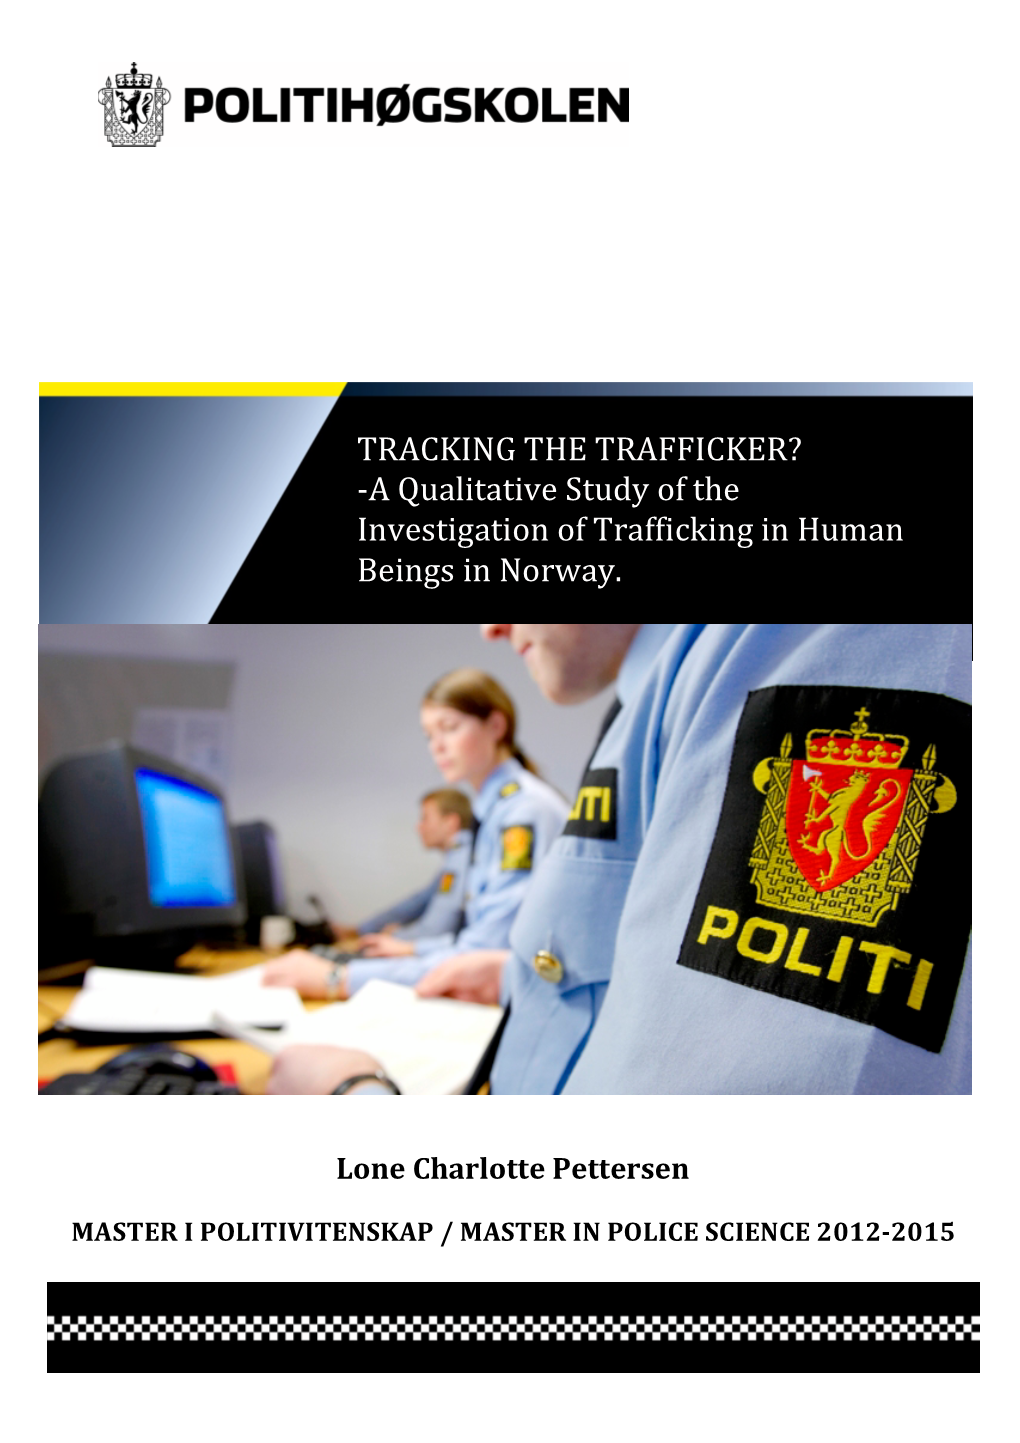 TRACKING the TRAFFICKER? -A Qualitative Study of the Investigation of Trafficking in Human